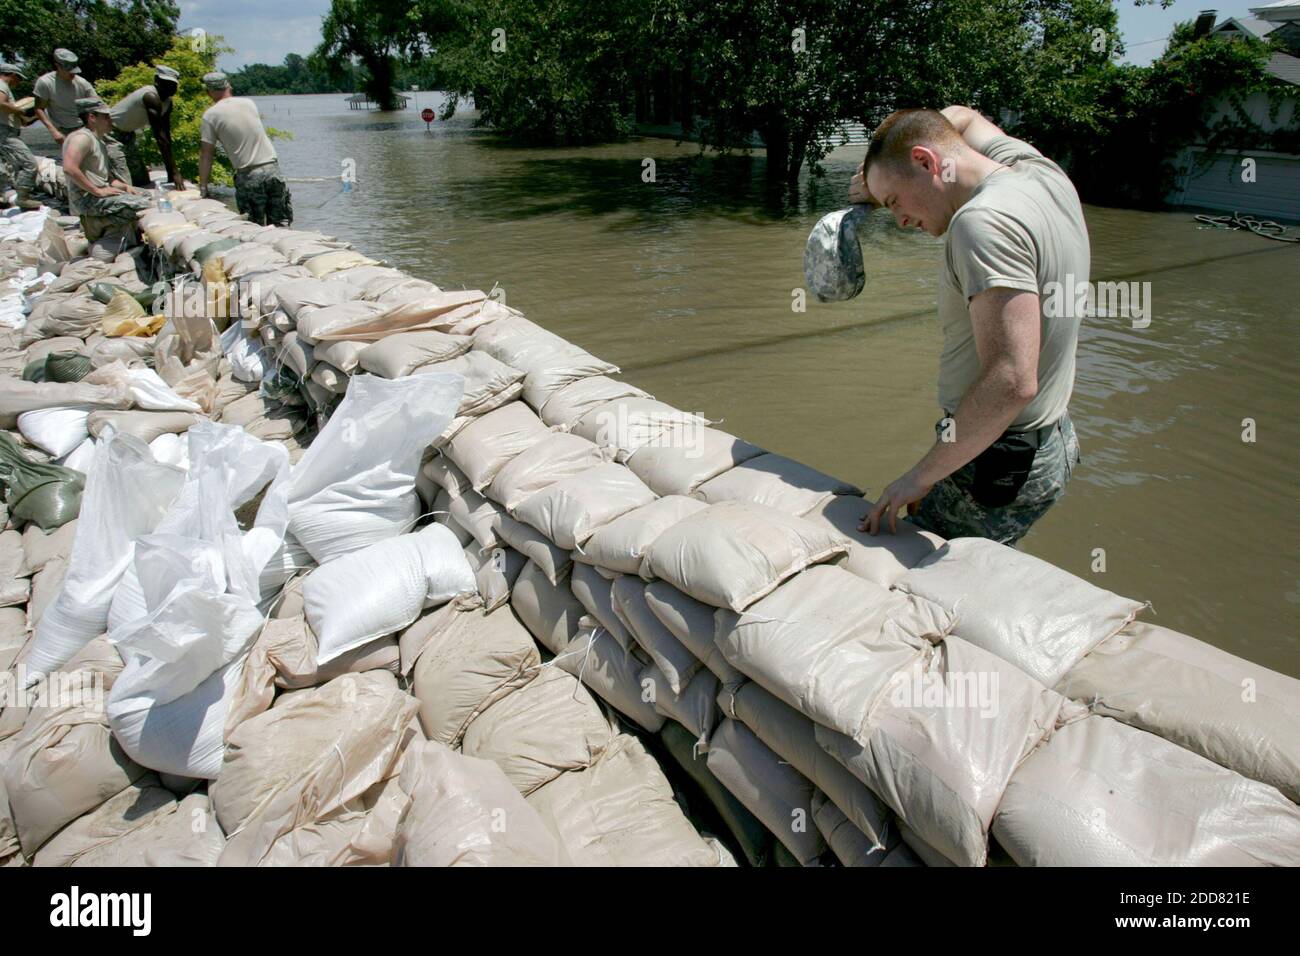 NO FILM, NO VIDEO, NO TV, NO DOCUMENTARY - Missouri National Guard SPCL Travis Voyles wipes sweat from his forehead as he piles sandbags on the Mississippi River waterfront in downtown Clarksville, MO, USA on Thursday, June 19, 2008. Photo by Kuni Takahashi/Chicago Tribune/MCT/ABACAPRESS.COM Stock Photo